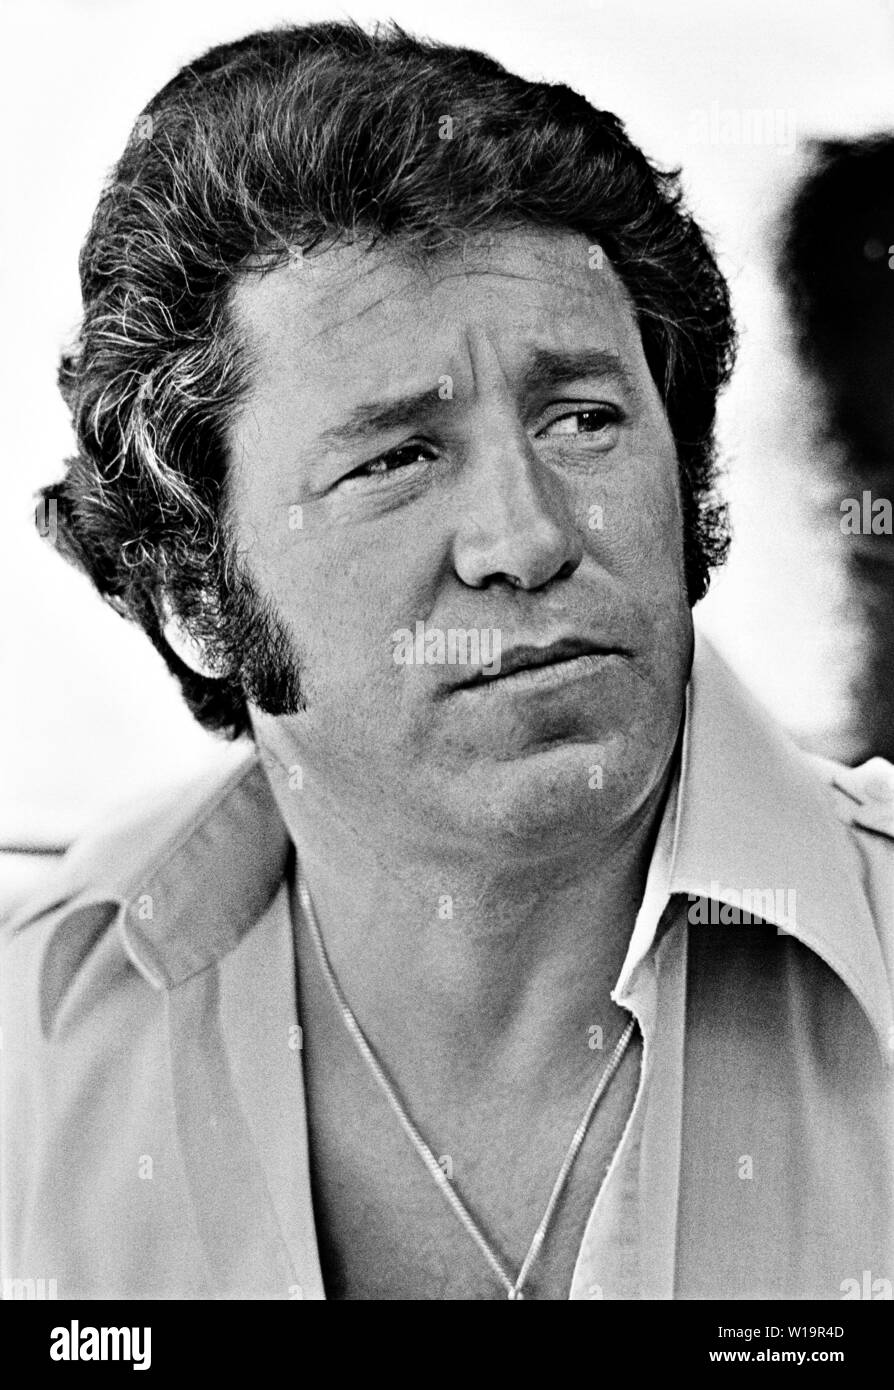 American F1 driver Mario Andretti 37 years, at Anderstorp 1977 Stock Photo